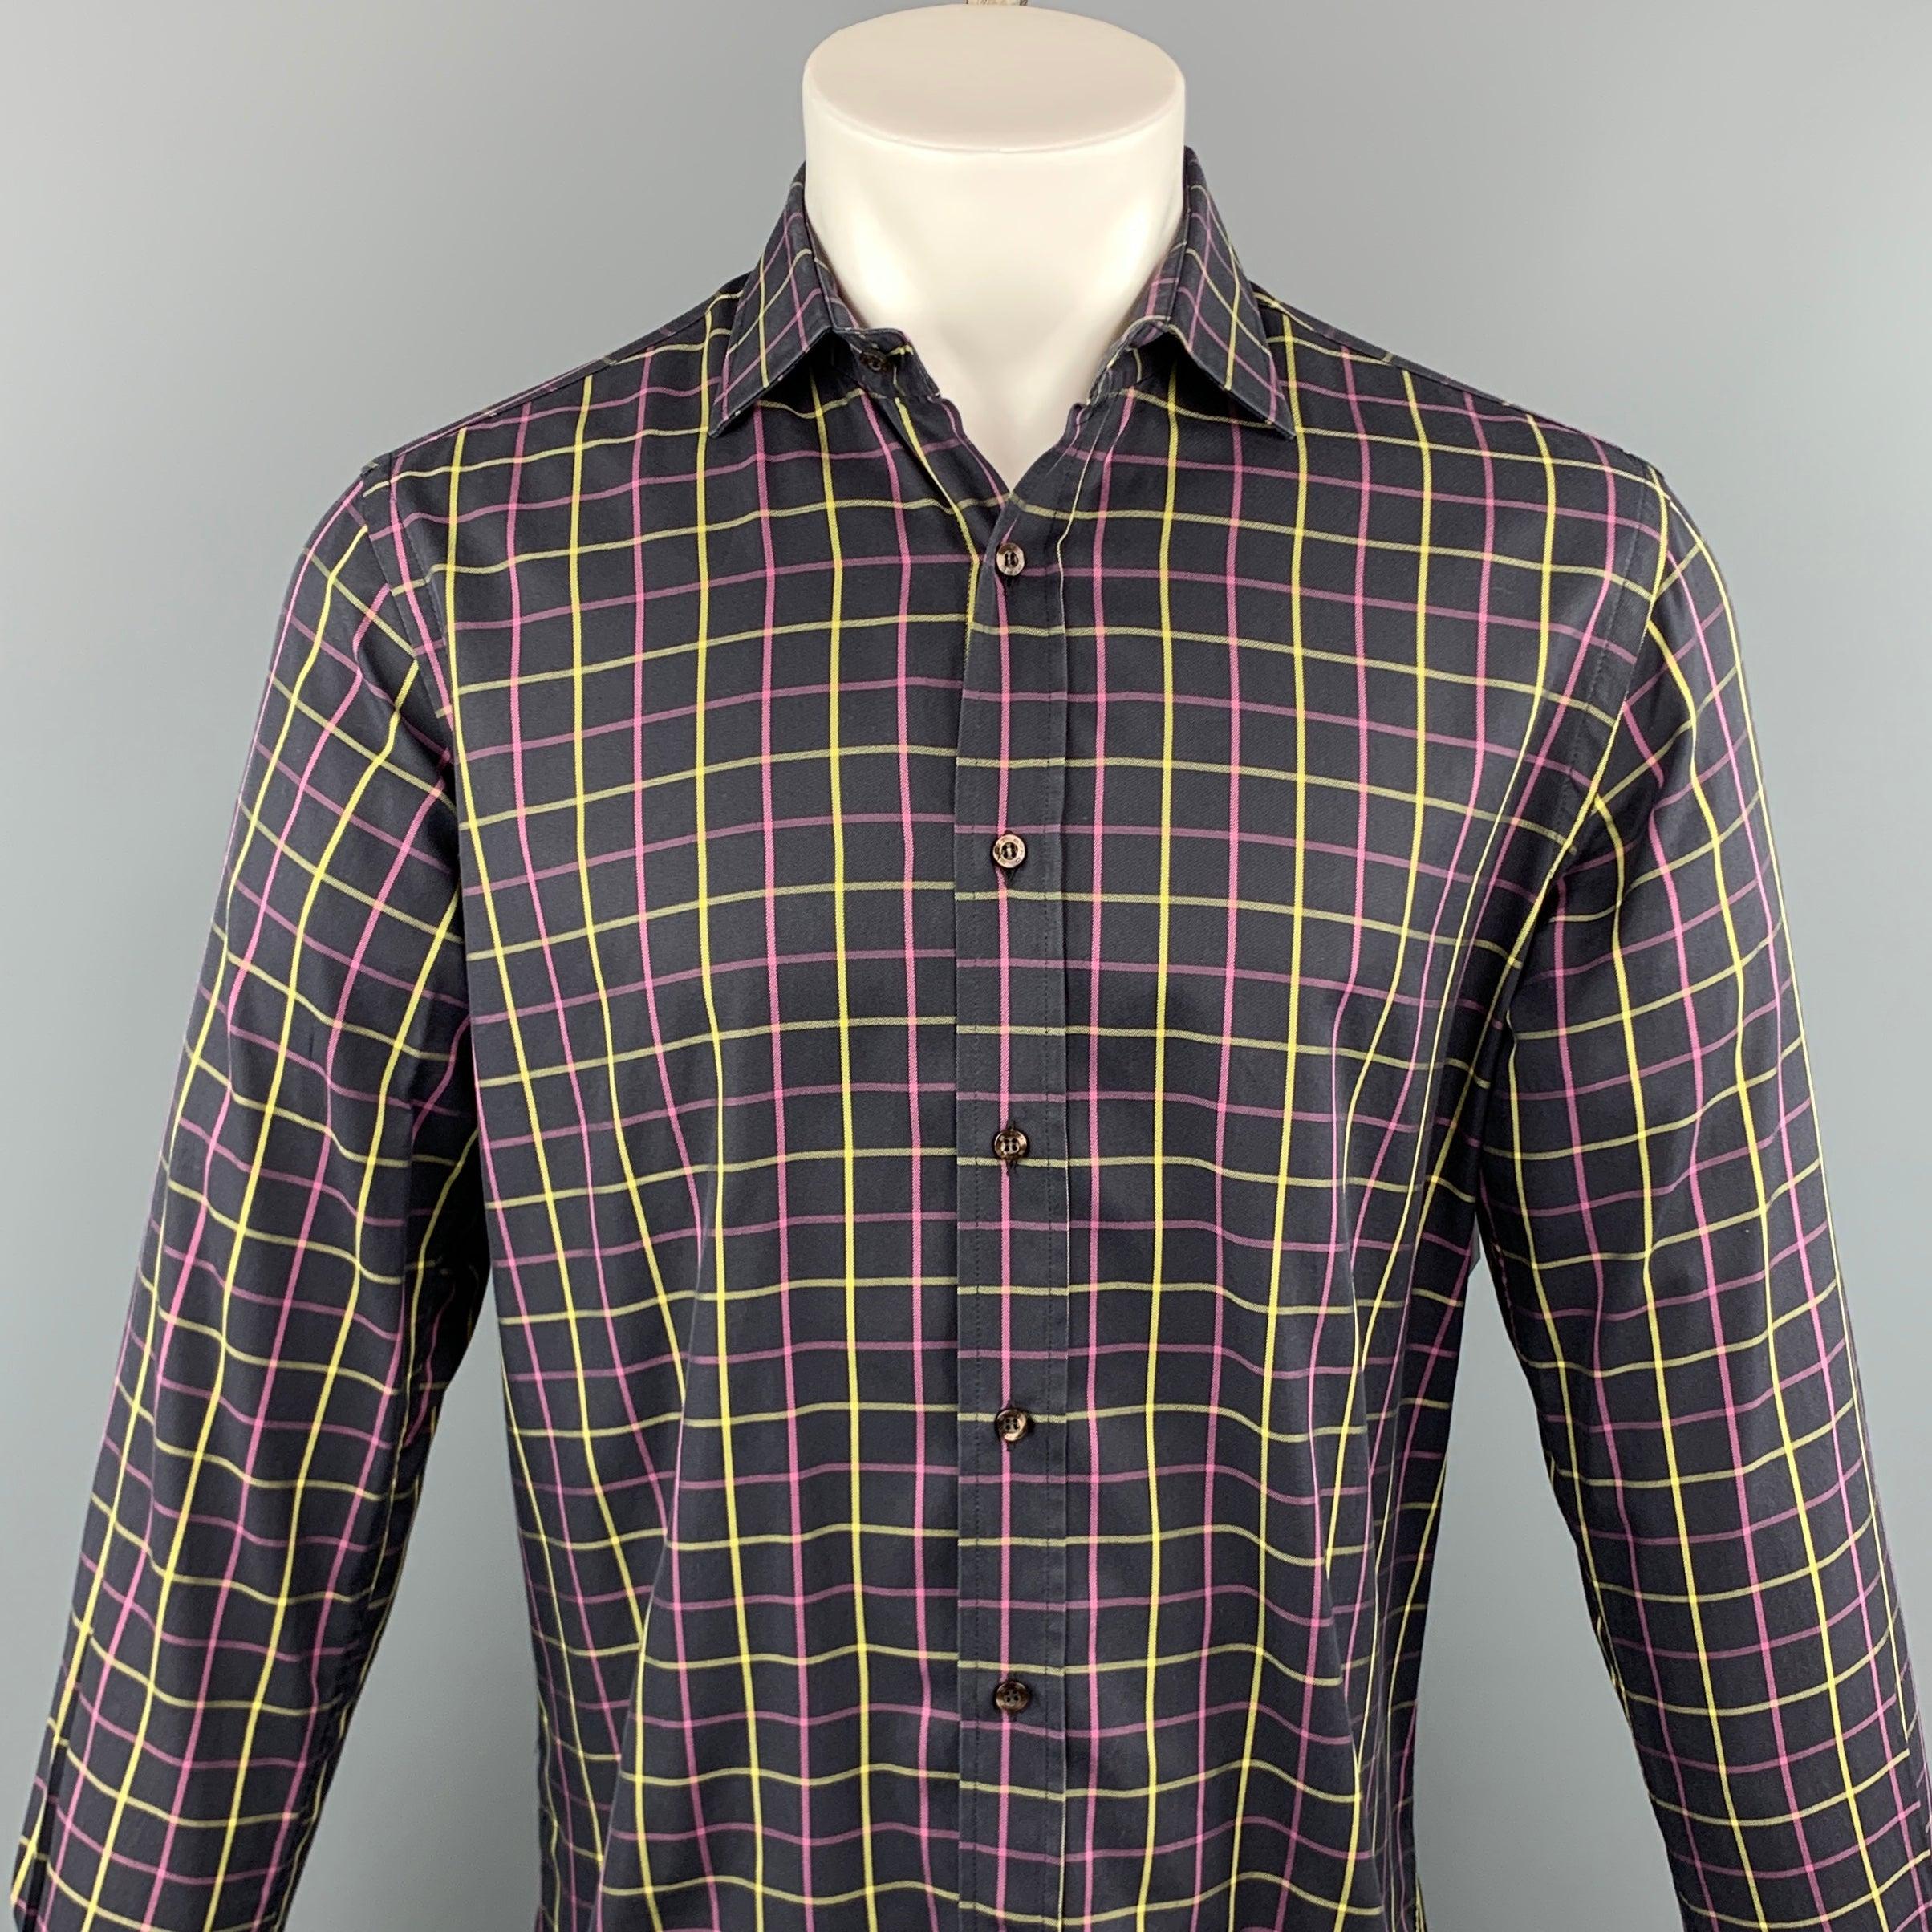 ETRO long sleeve shirt comes in a black and purple plaid cotton featuring a button up style and a spread collar. Made in Italy.Excellent Pre-Owned Condition. 

Marked:   40 

Measurements: 
 
Shoulder: 17 inches  Chest: 44 inches  Sleeve: 26.5